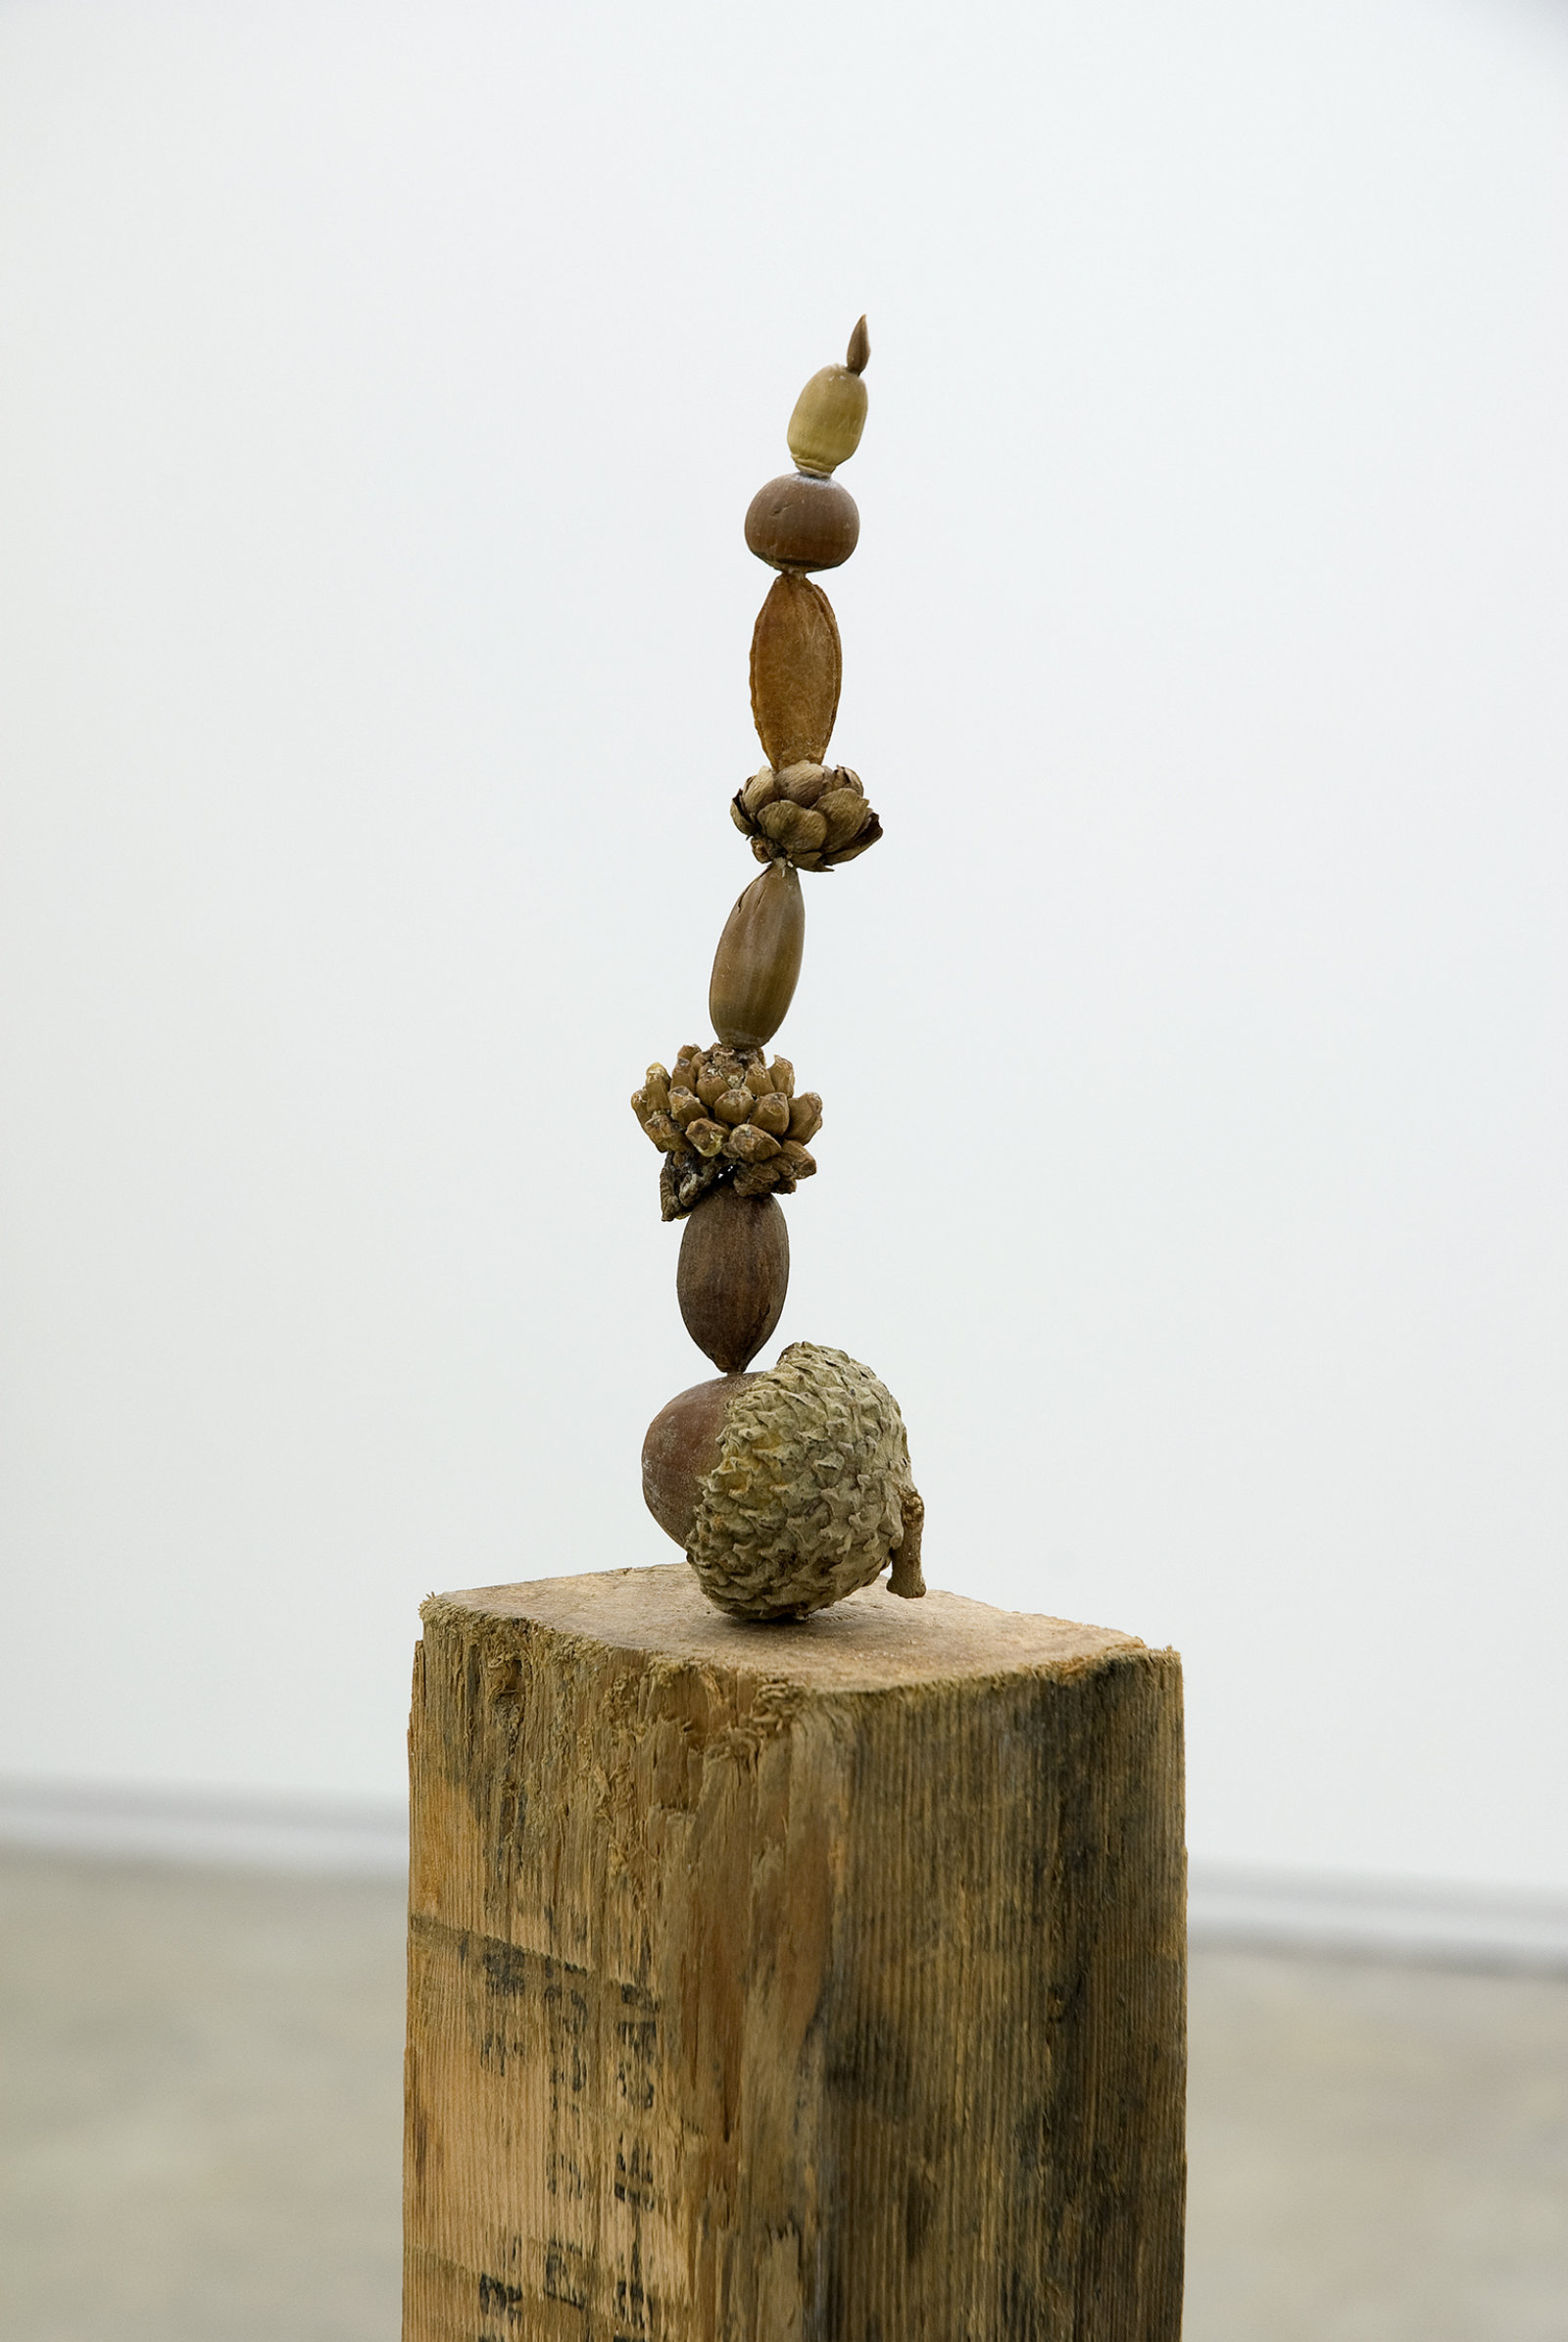 Ashes Withyman, Judd also planted these trees from Uncertain Pilgrimage (detail), 2006-2009, nectarine pit, apple seed, Rothko pecan, Judd cone, unidentified seeds and nuts, found wood, 47 x 4 x 3 in. (118 x 9 x 6 cm)